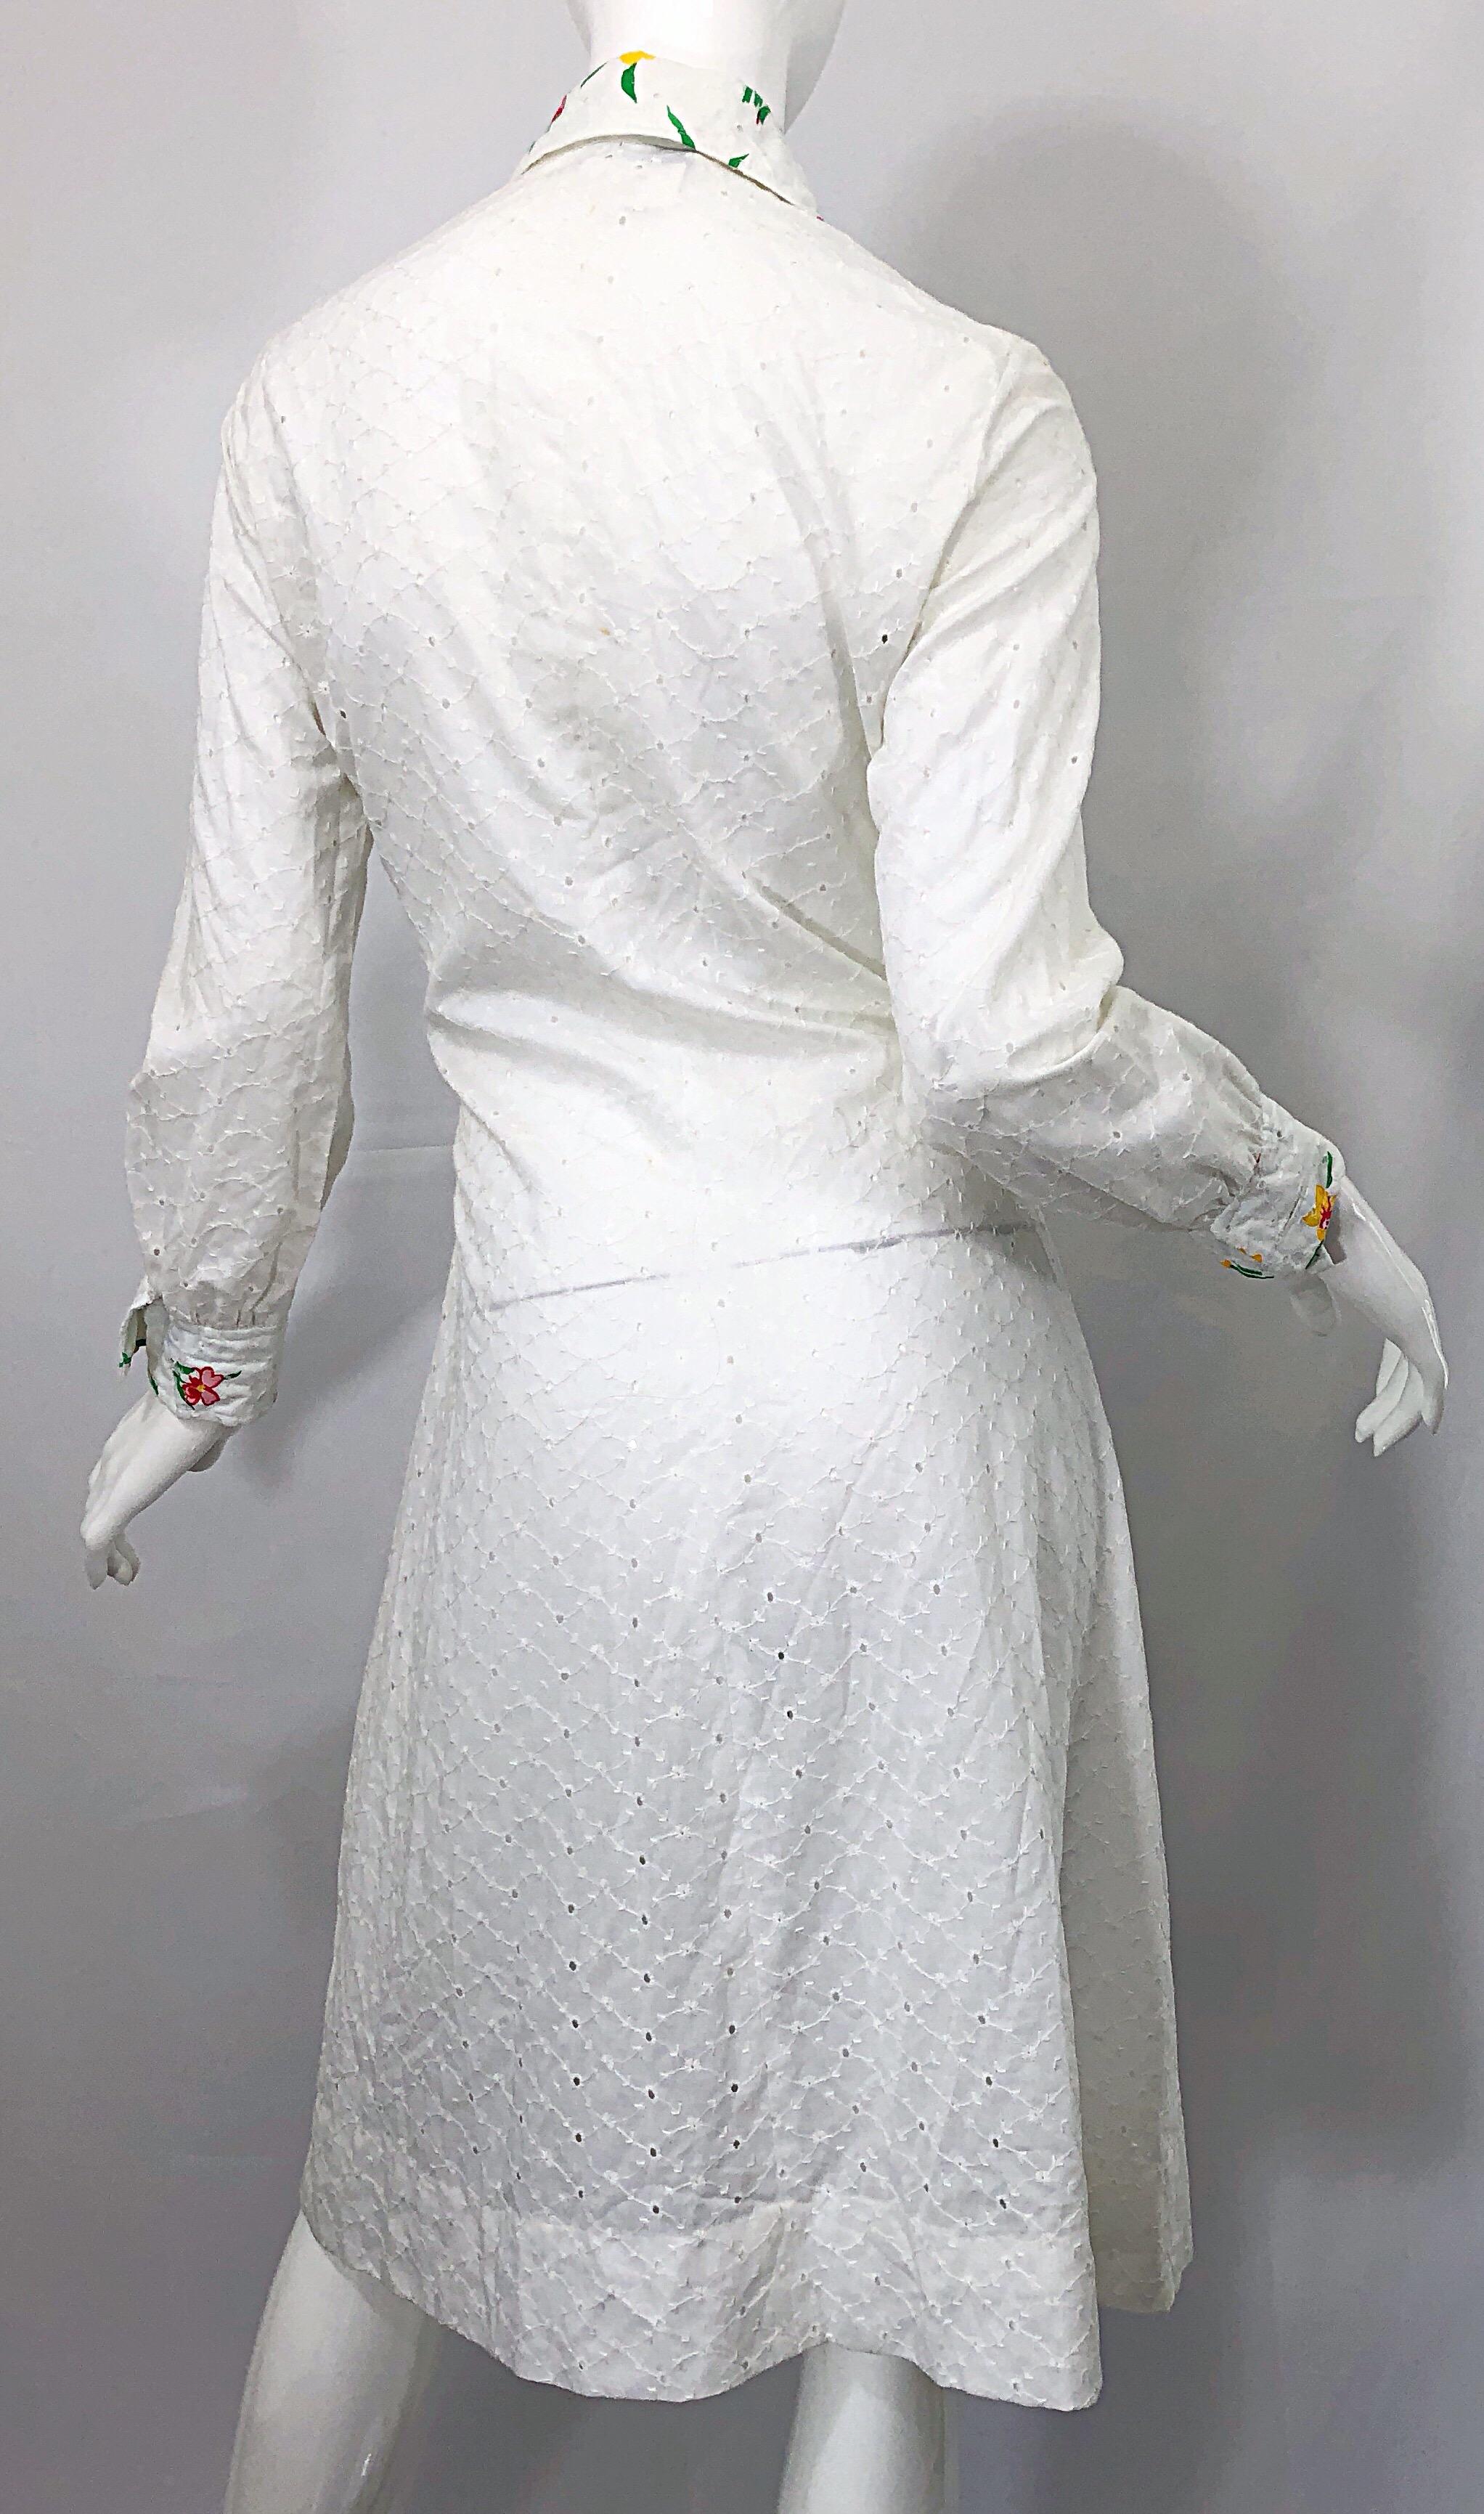 1970s Joseph Magnin White Eyelet Cotton Embrodiered Vintage 70s Shirt Dress For Sale 9